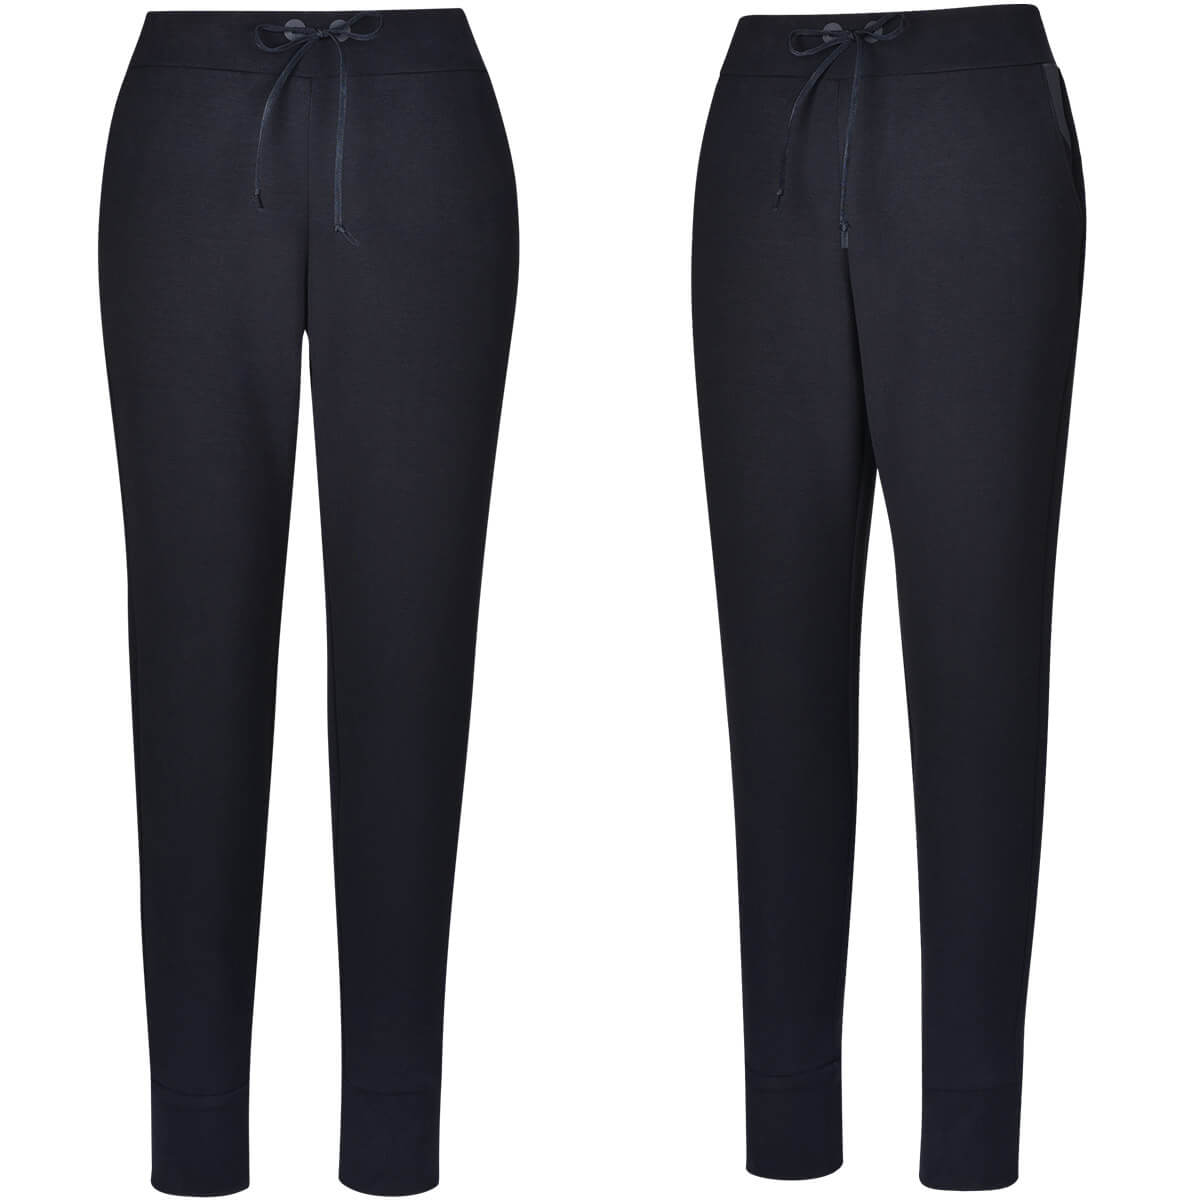 Jogger pant front and side